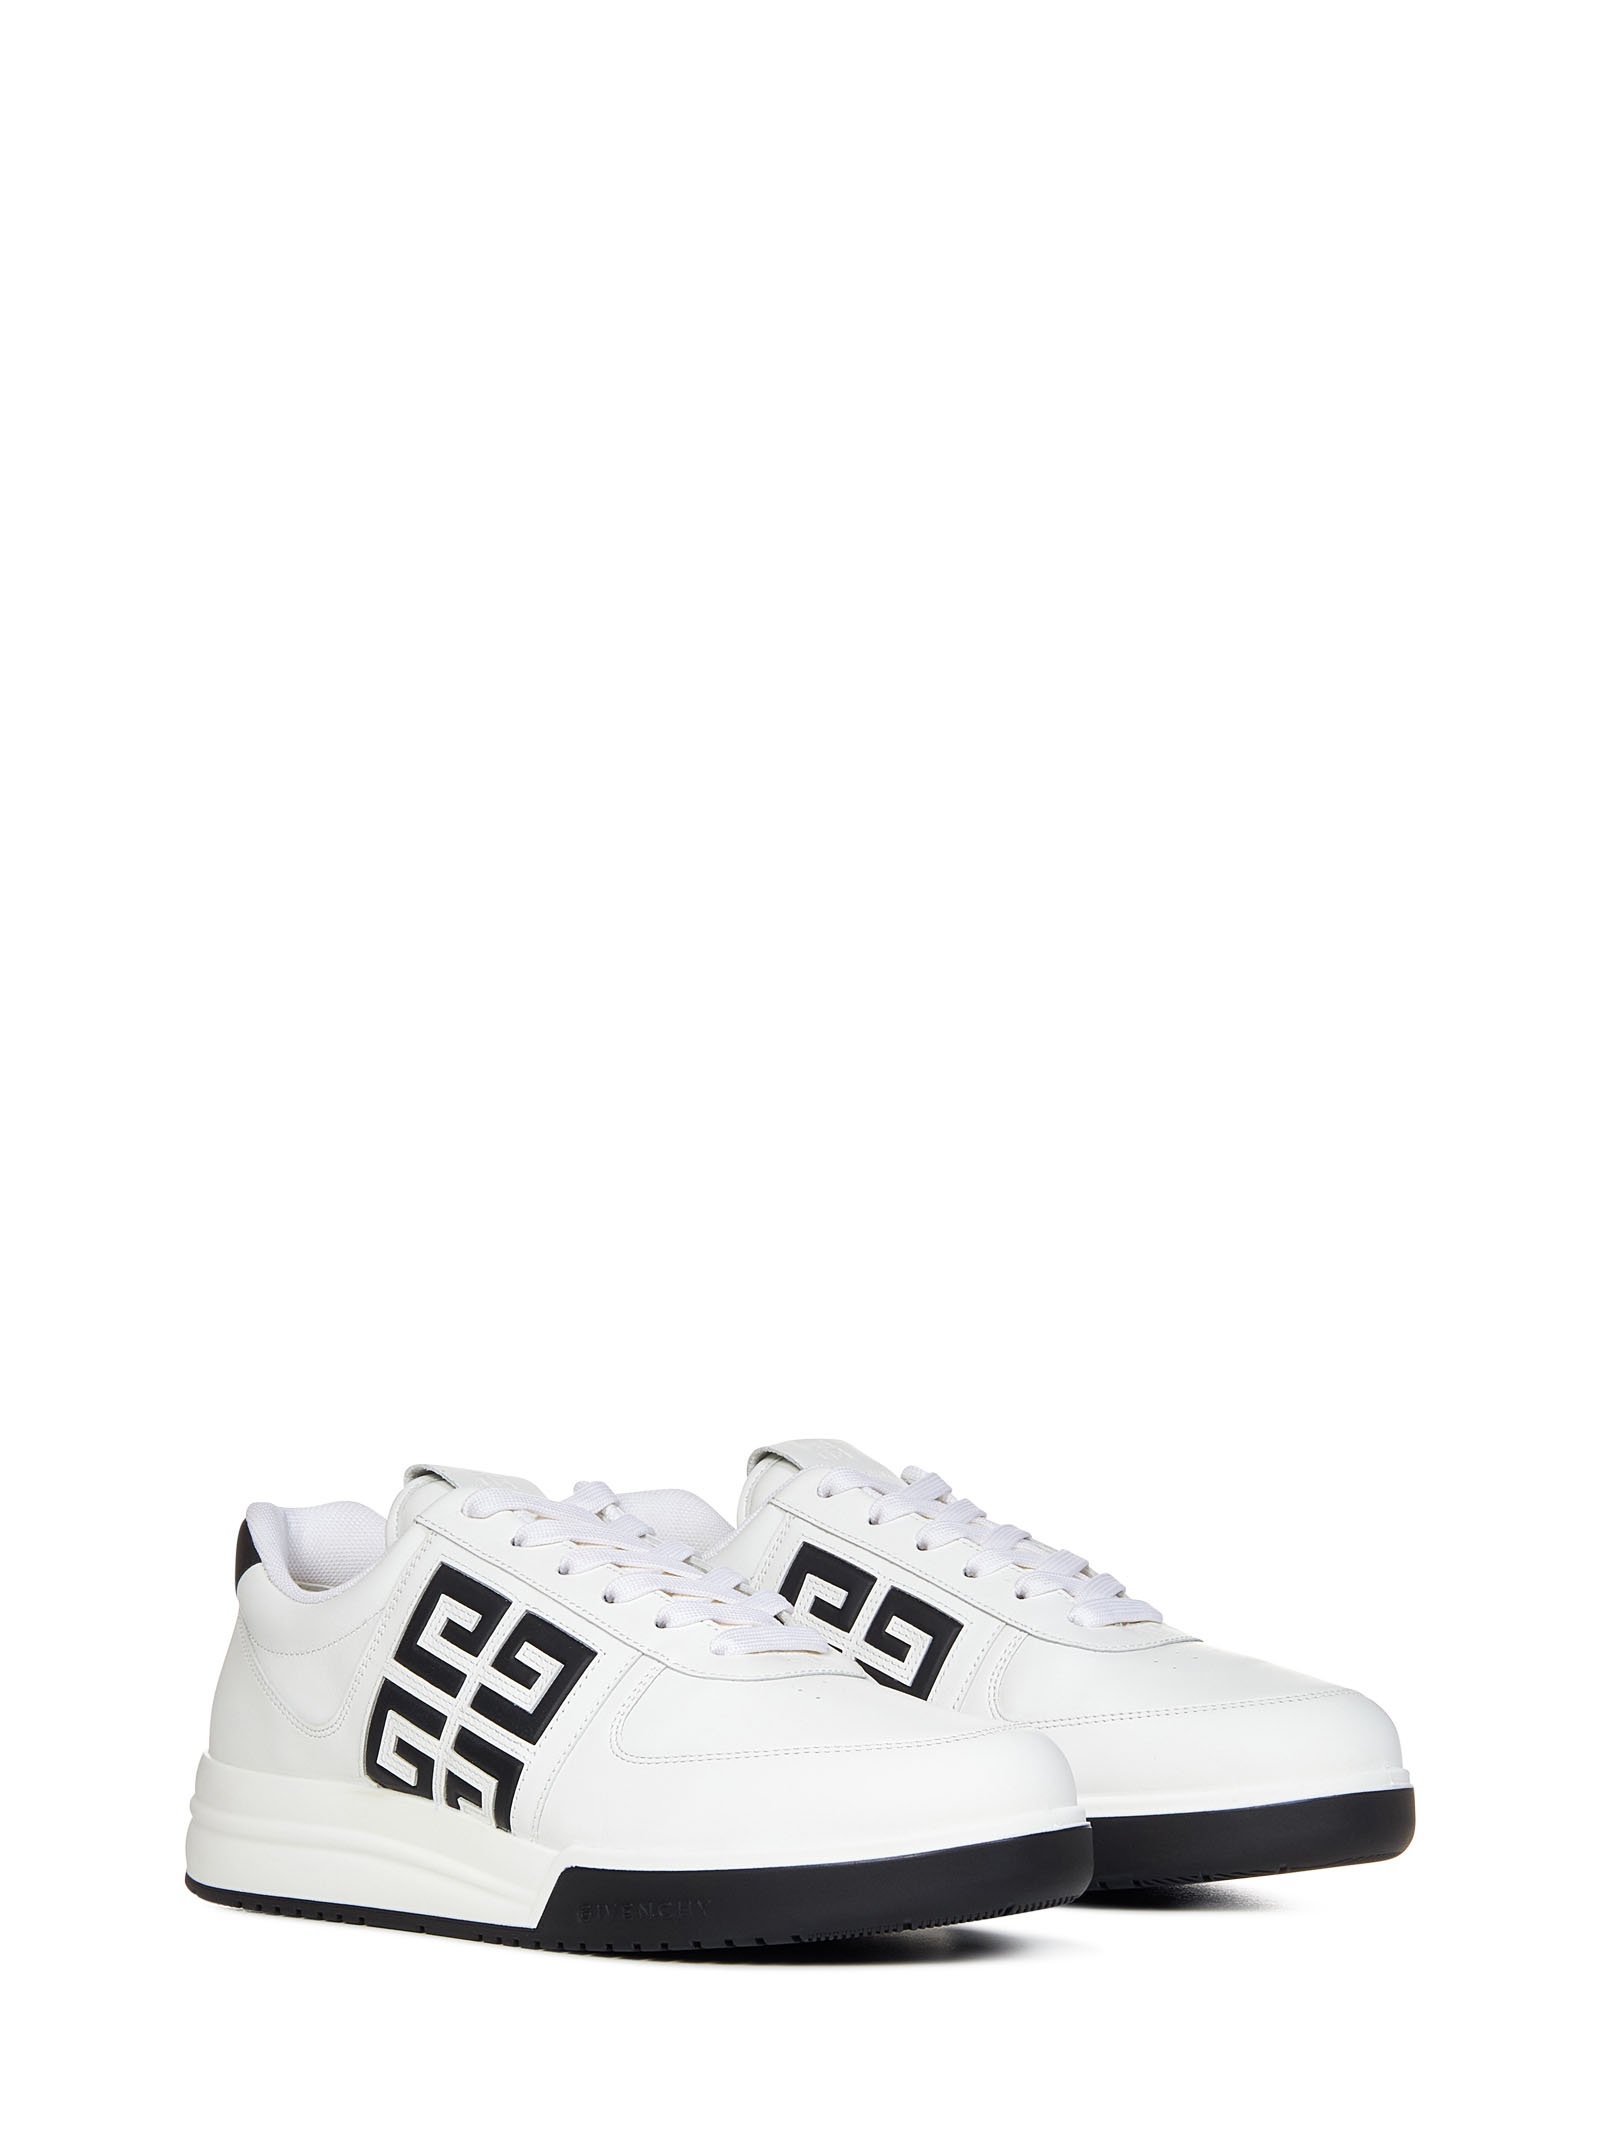 White calf leather low-top sneakers with embossed black 4G logo at side. - 3